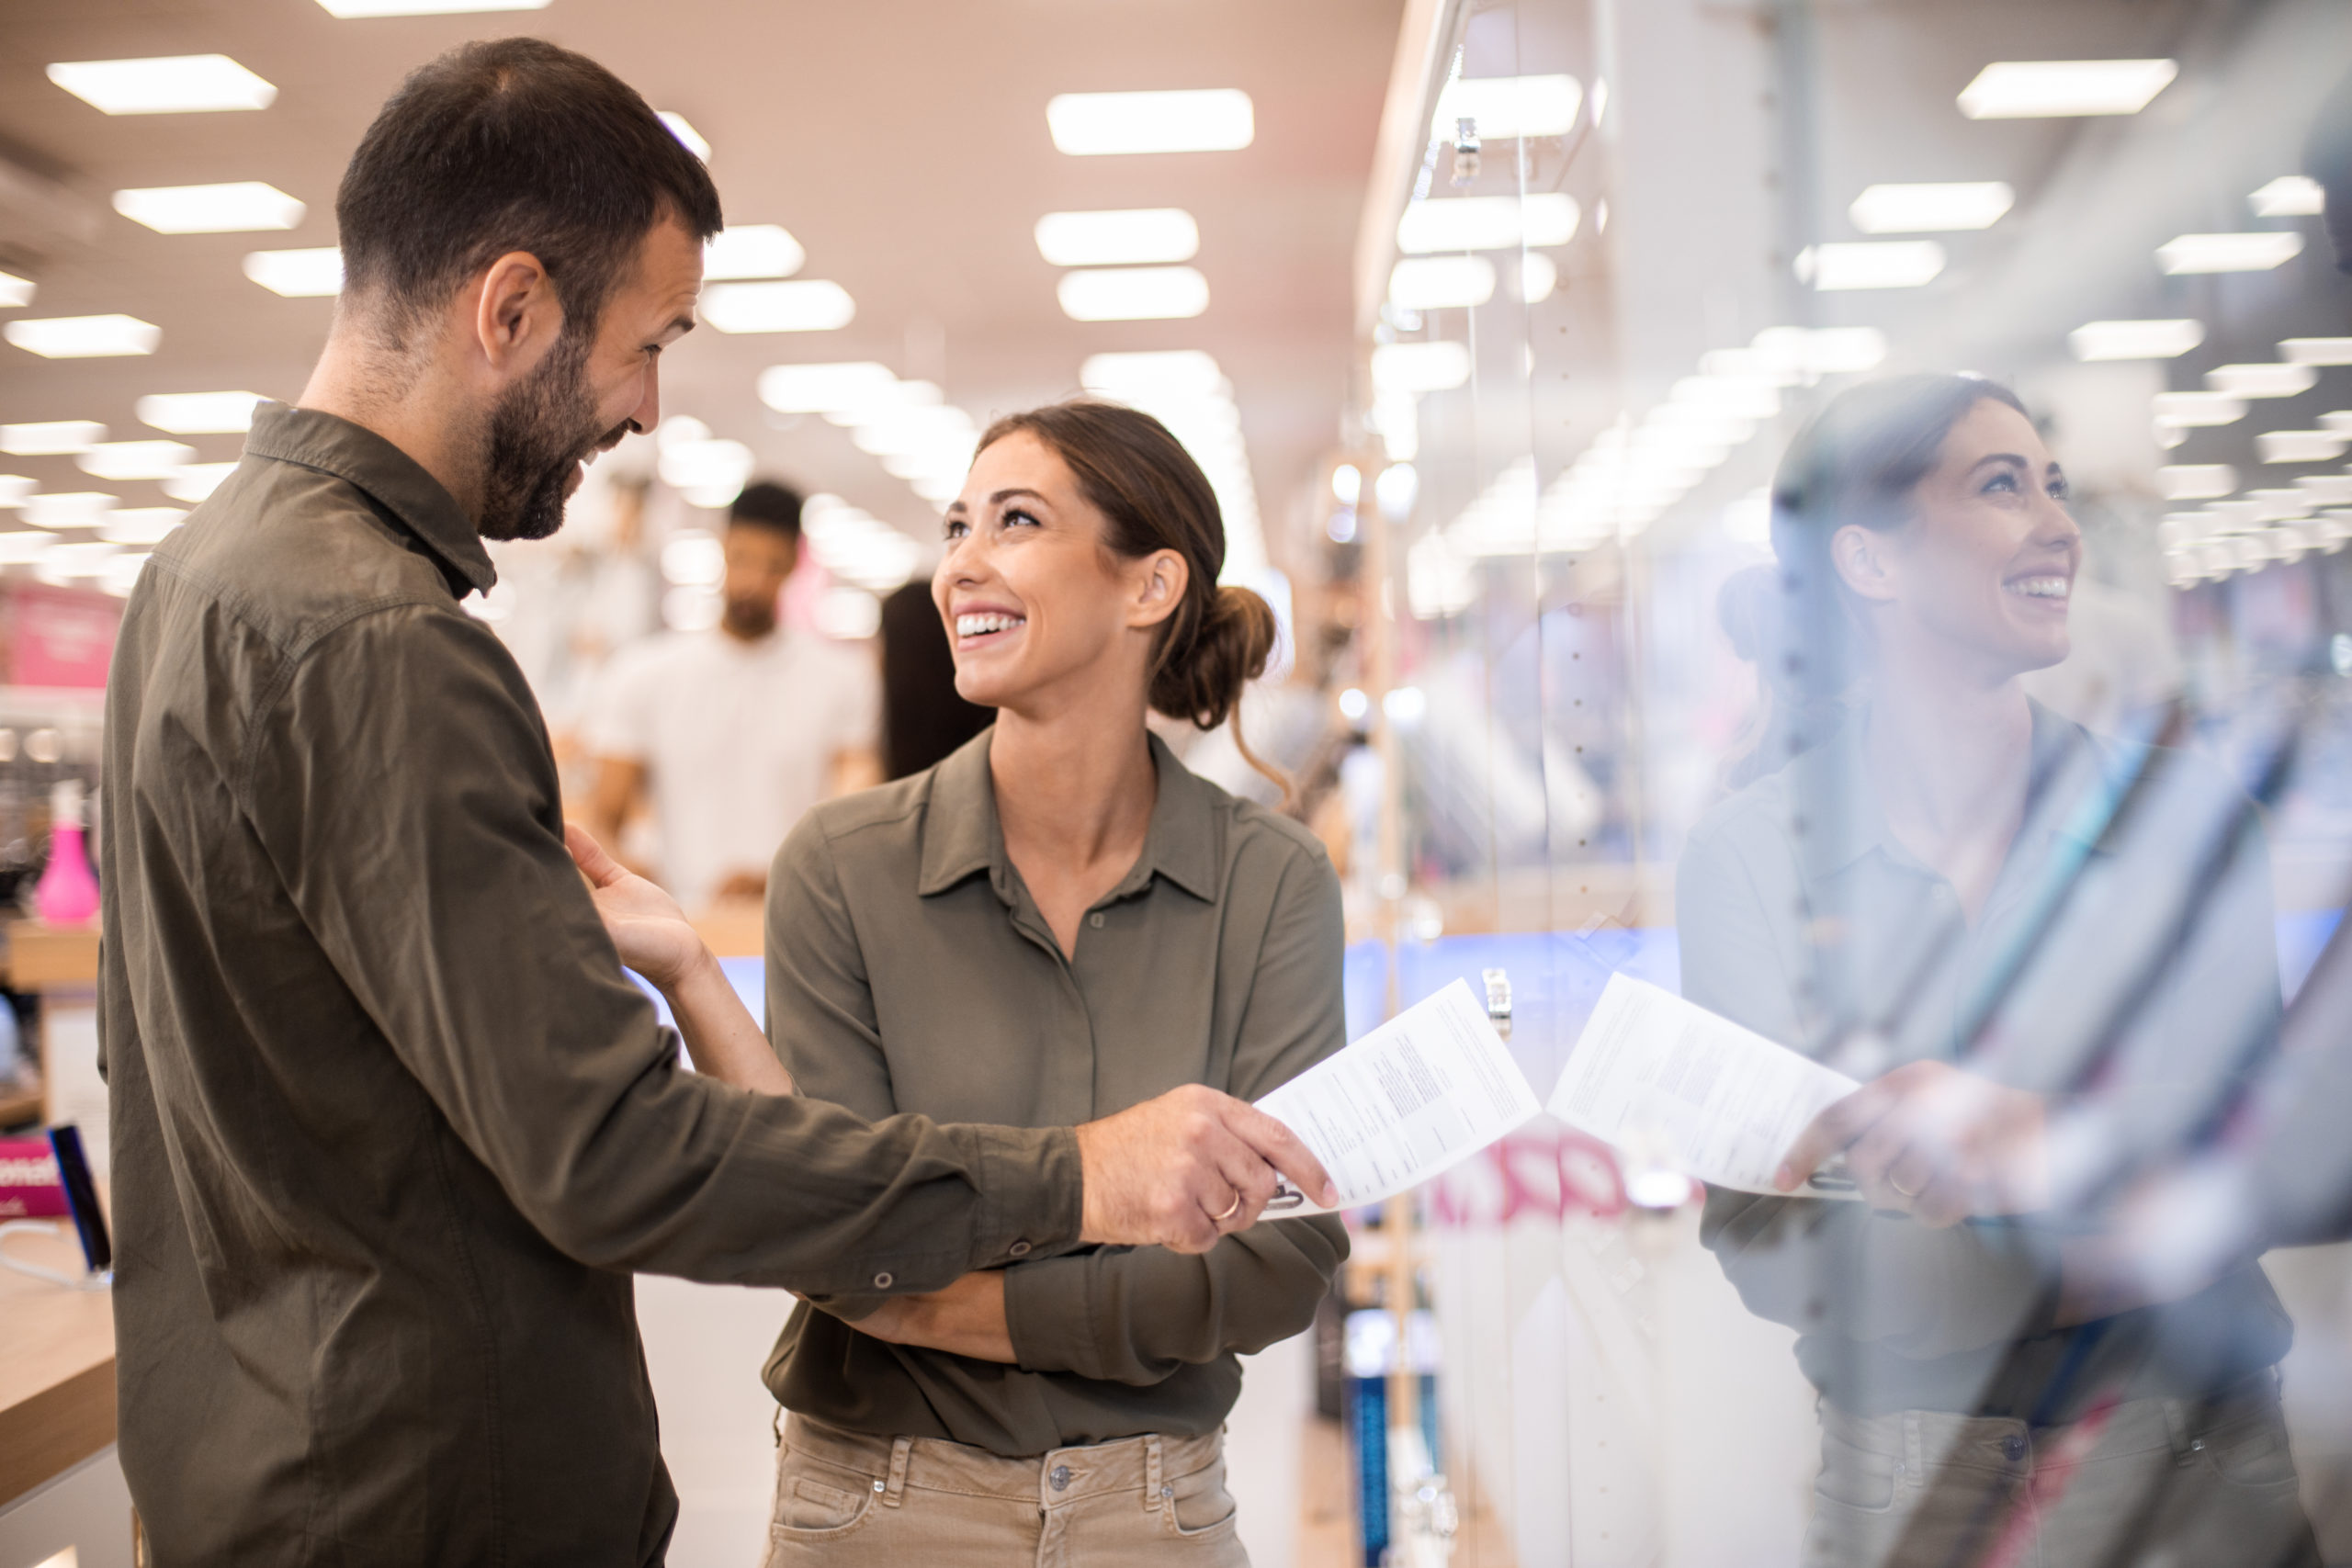 Learn how filling positions with workers that can help deliver a differentiating experience can drive customer satisfaction, experience, and loyalty.